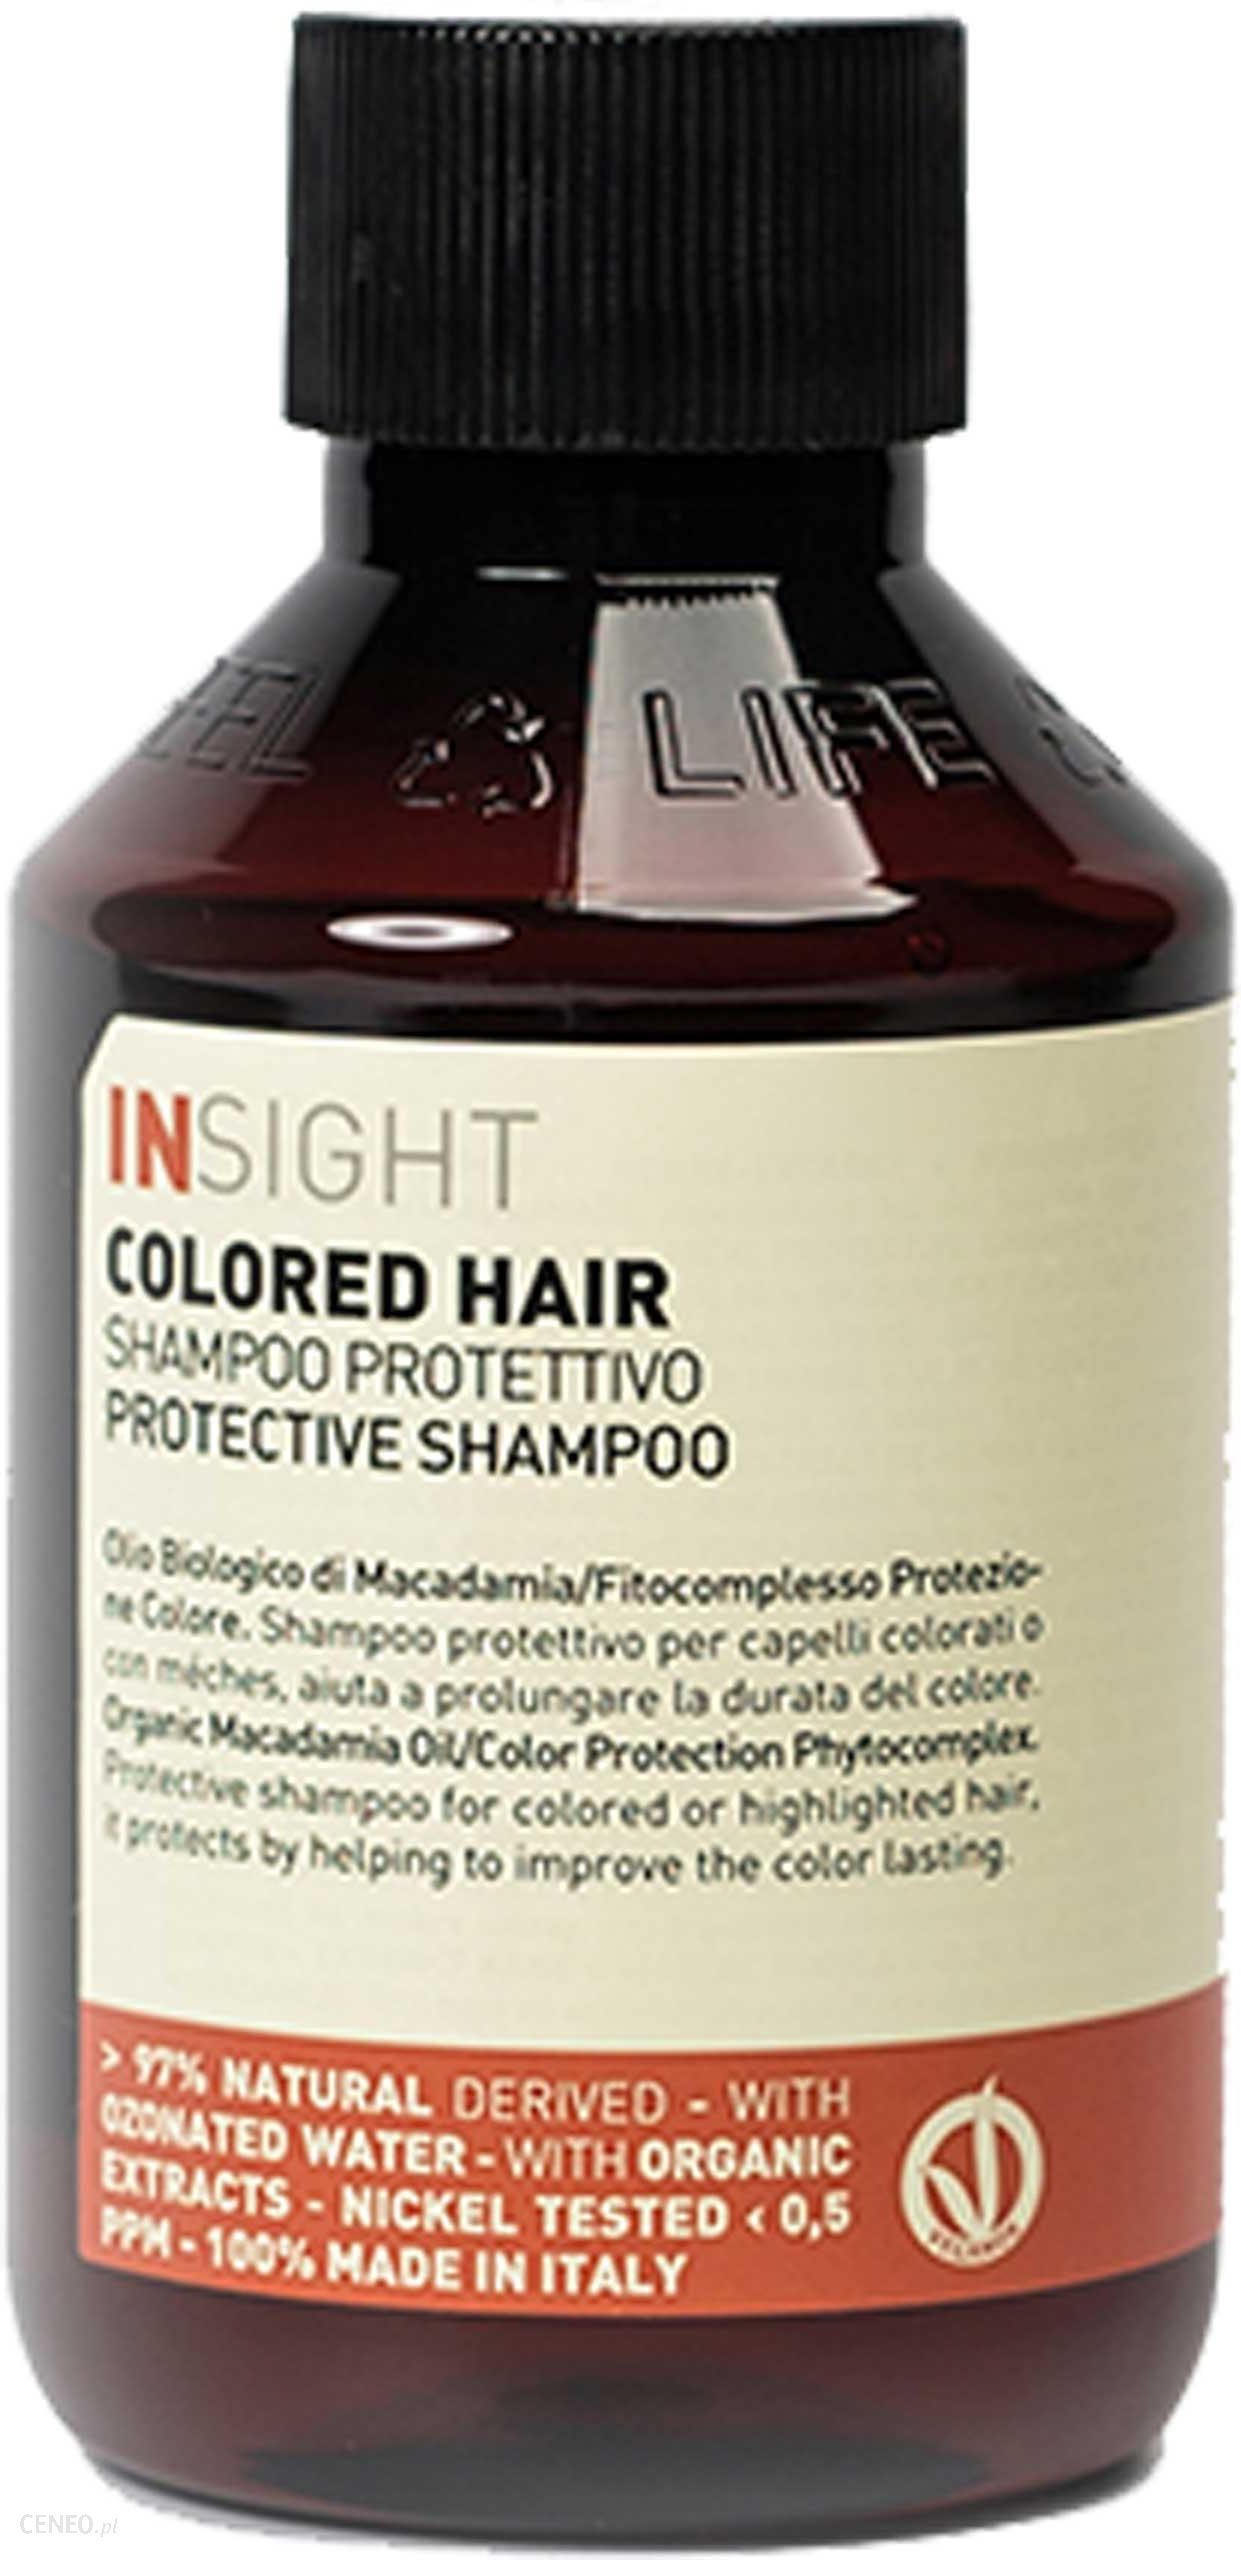 insight colored hair szampon